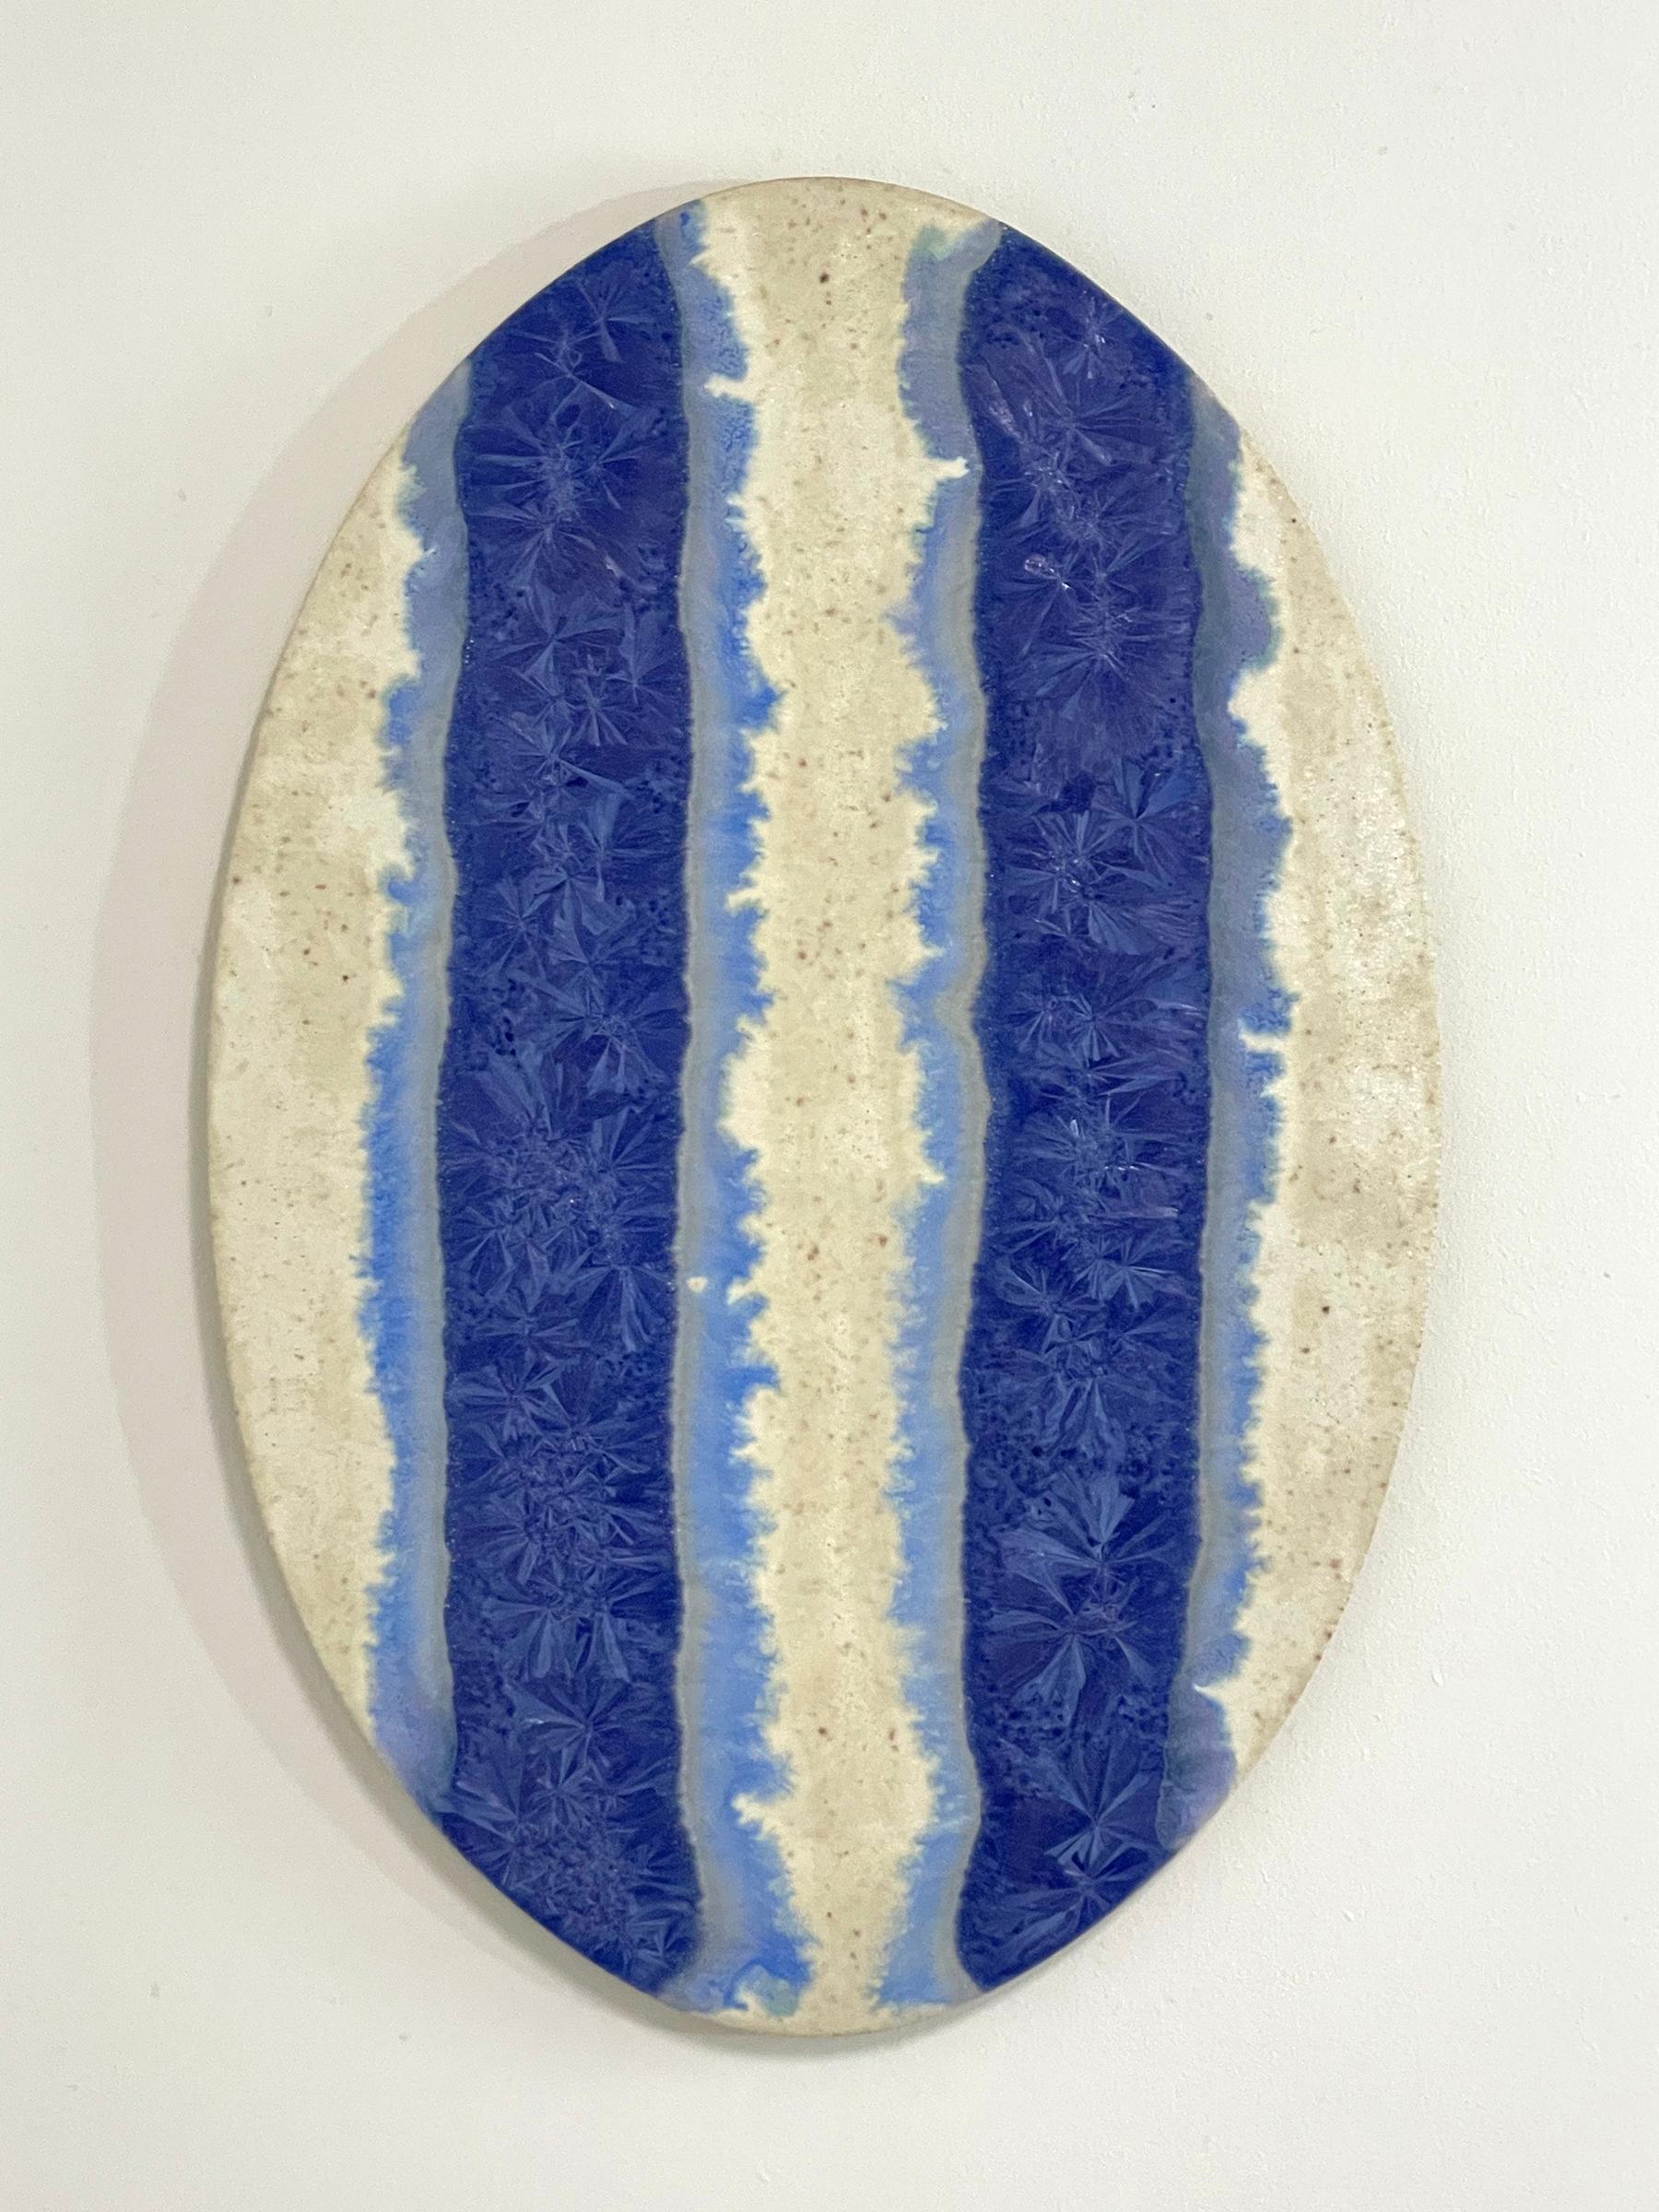 Alchemy
Ceramic crystal glaze painting by William Edwards
Hand rolled earthenware circular slab with crystal glaze. 

William received his BFA in sculpture from the historic San Francisco Art Institute and his MFA from UC Davis. William produces